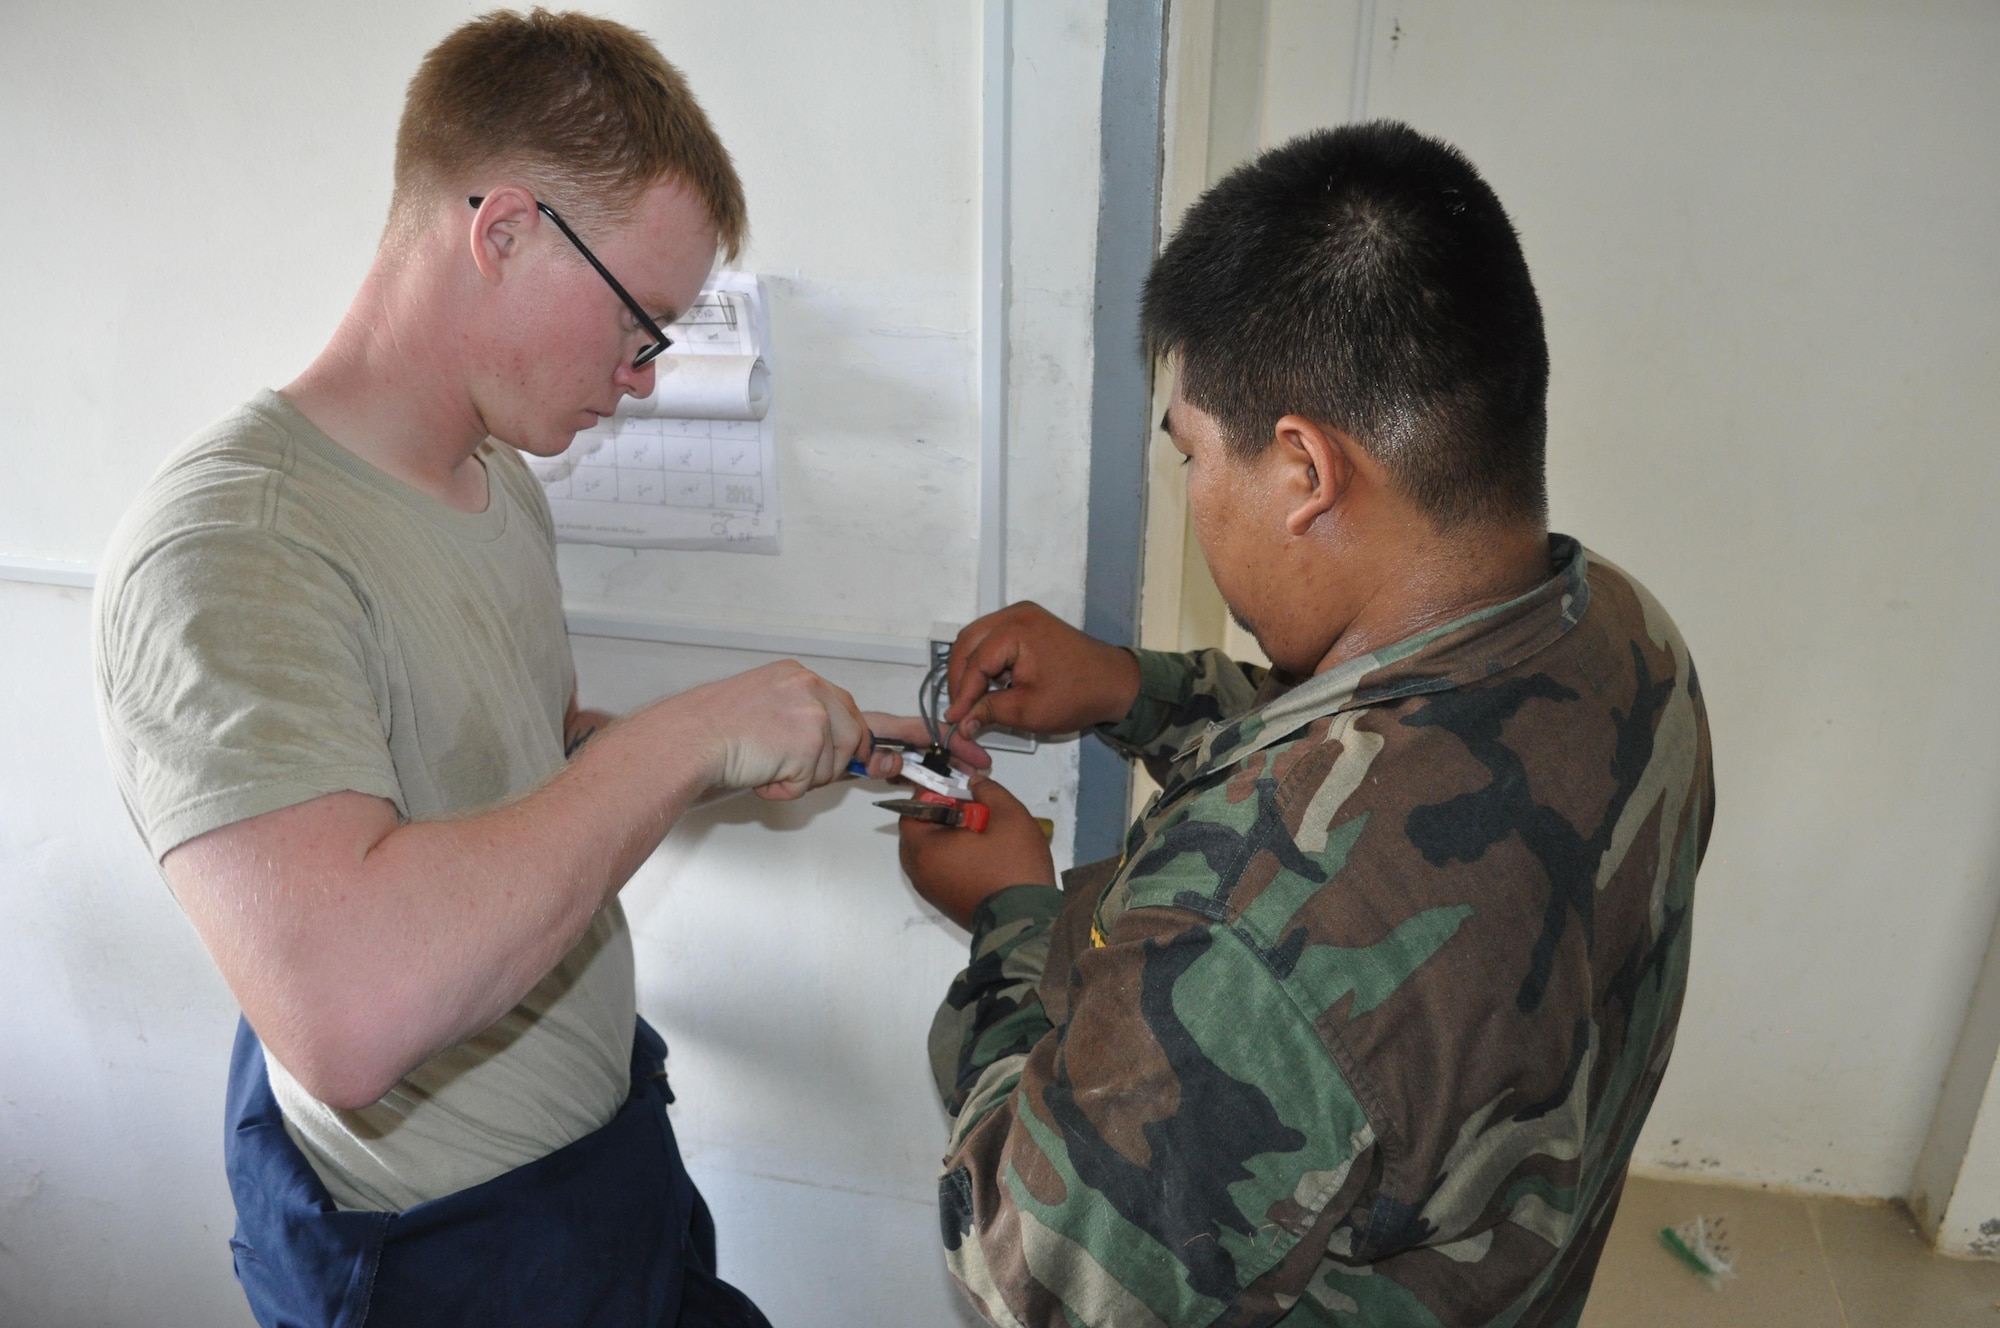 Senior Airman Timothy Janca, electrician from the 18th Civil Engineer Squadron, Kadena Air Base, Japan, installs a light switch with electrician Sgt 2nd Class Sat Sovannarith, Royal Cambodian Armed Forces at a health center Sept. 11, 2013, during Operation Pacific Angel 13-5 at Takeo Province, Cambodia. The health center is one of three undergoing renovations. Thirty-six U.S. forces and RCAF have teamed up to complete renovations scheduled to end September 14. 